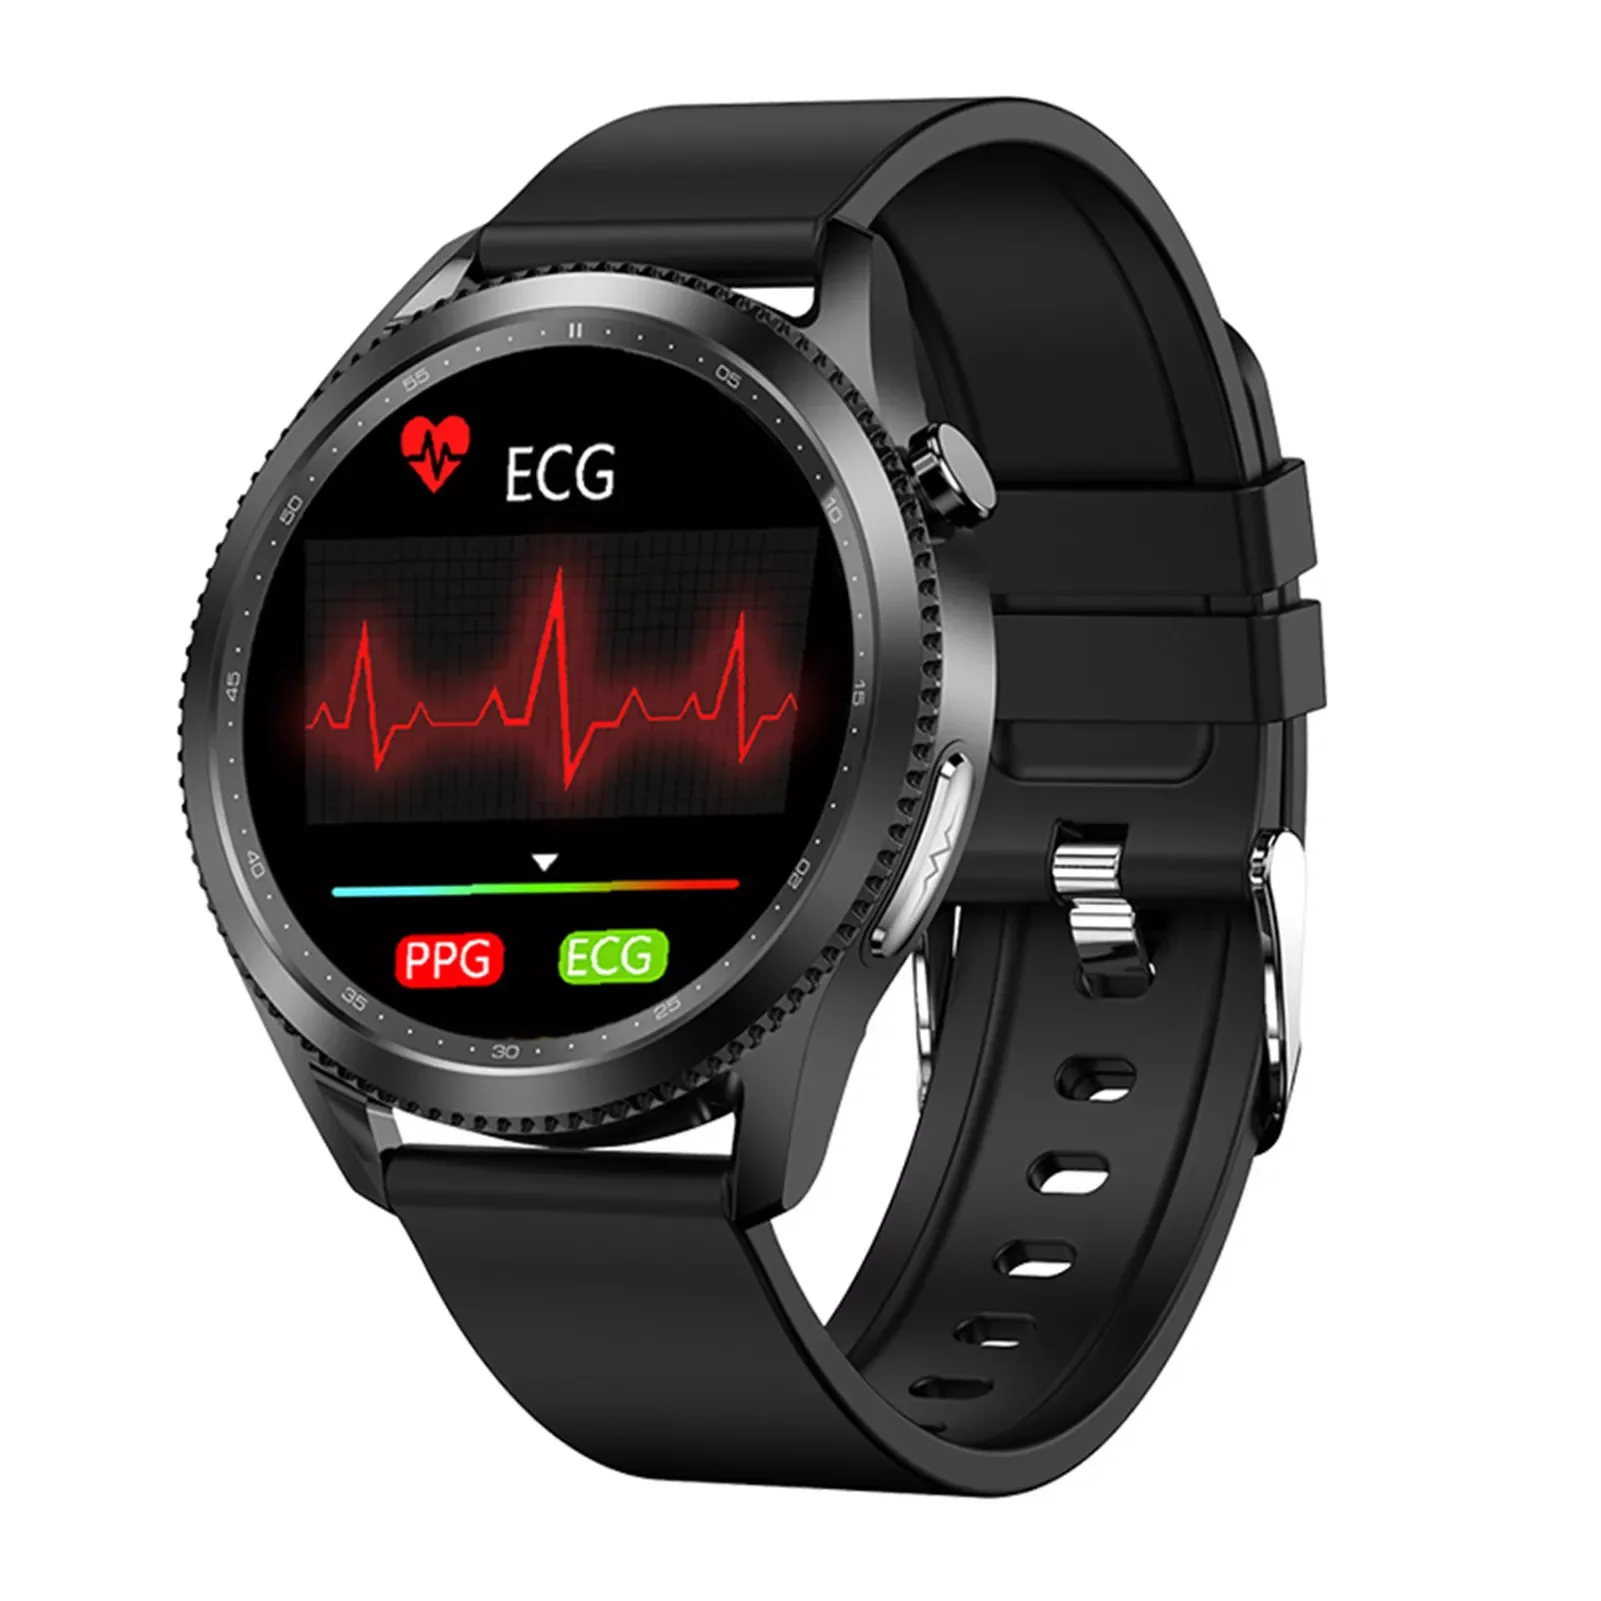 

NORTH EDGE E102 Smart Watch For Men Women Smartwatch Android IOS IP68 Watches Temp Oxygen Blood Pressure Sports Fitness Watch